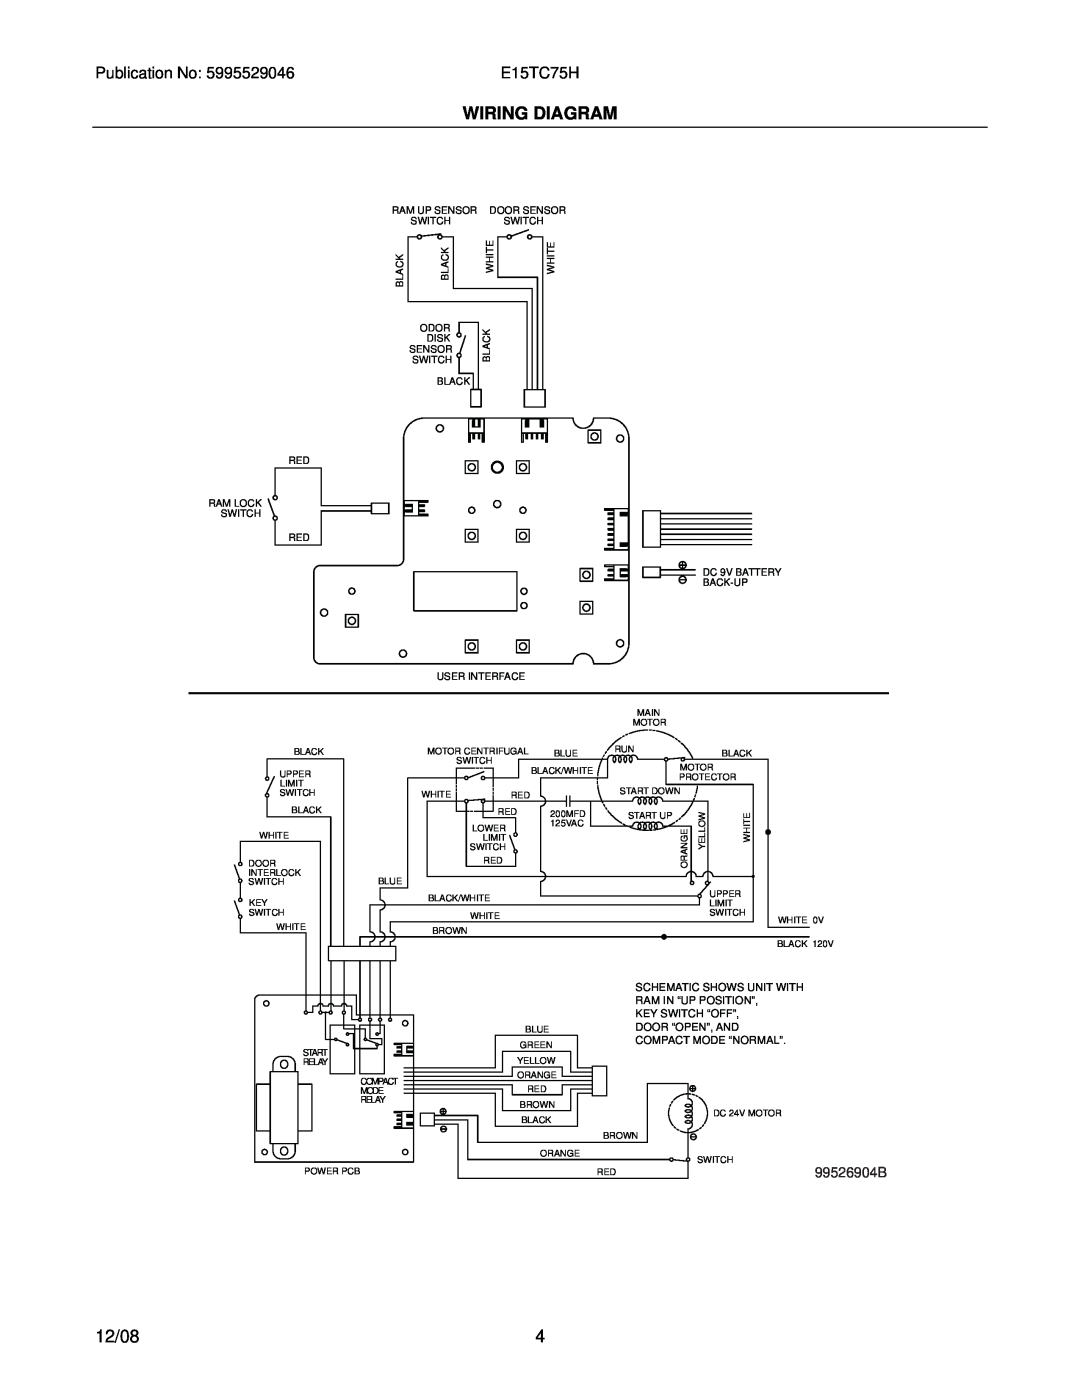 Electrolux E15TC75HP Wiring Diagram, 12/08, 99526904B, Schematic Shows Unit With, Ram In “Up Position”, Key Switch “Off” 